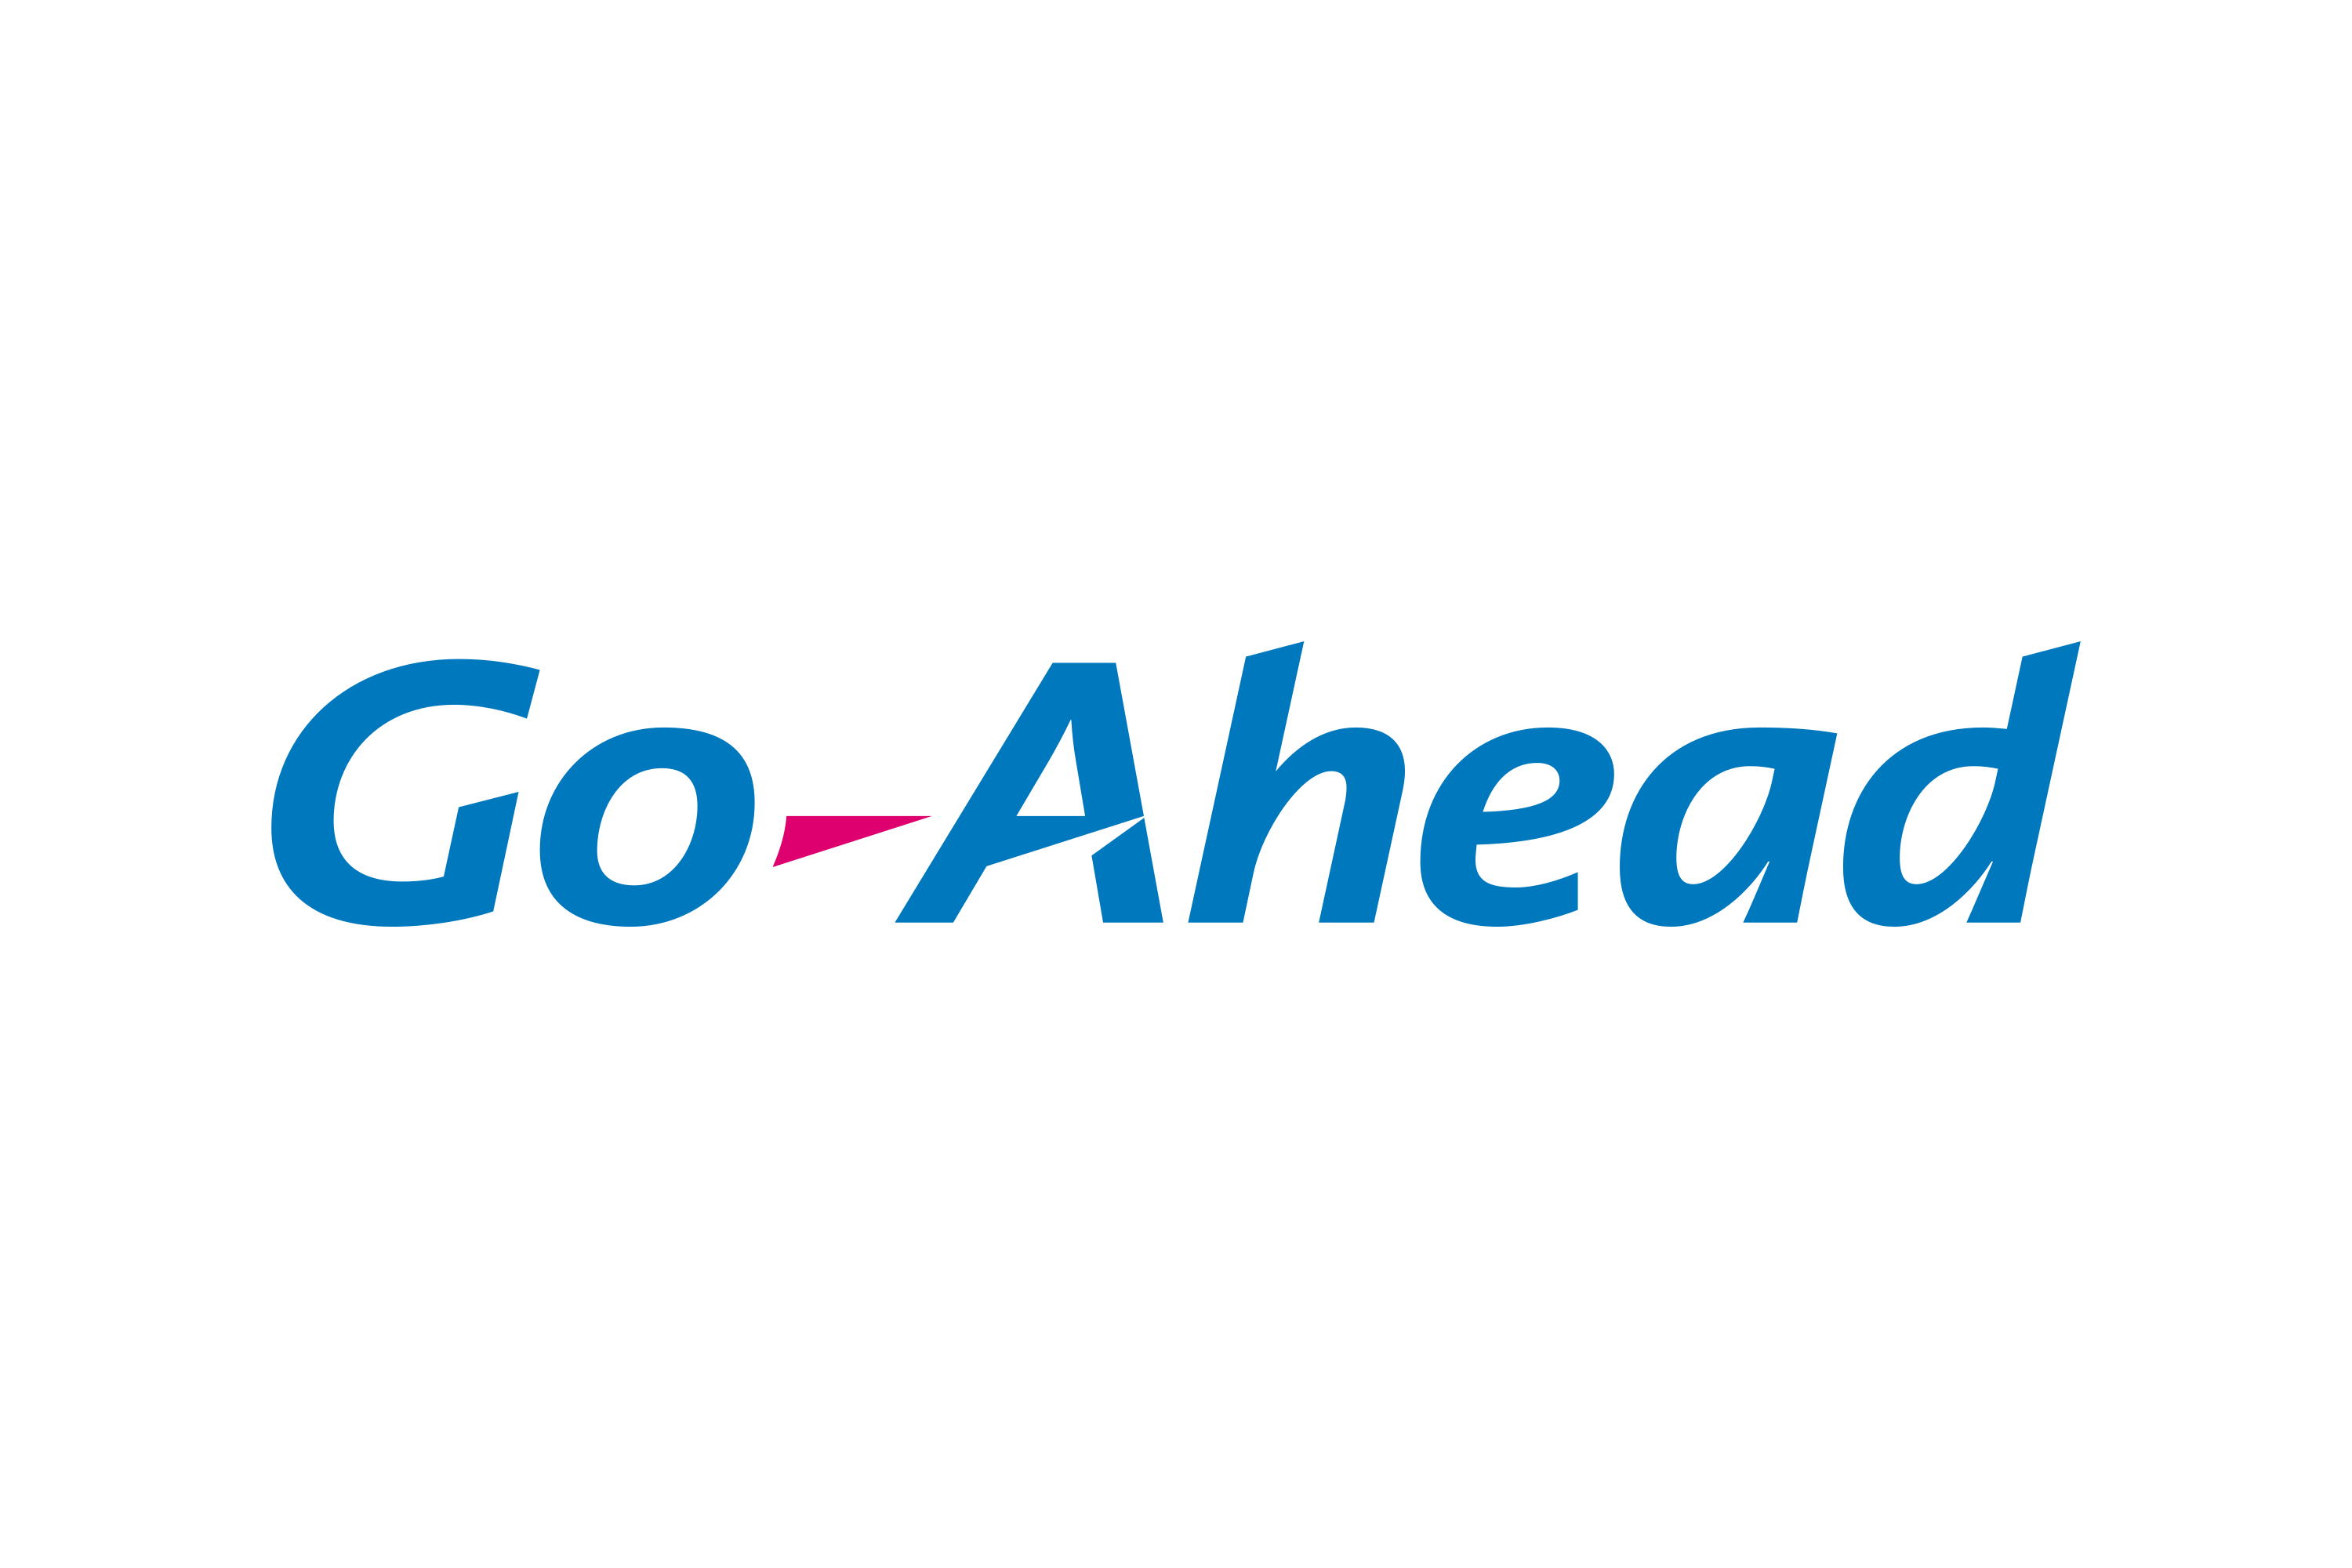 Download Go-Ahead Group plc Logo in SVG Vector or PNG File Format